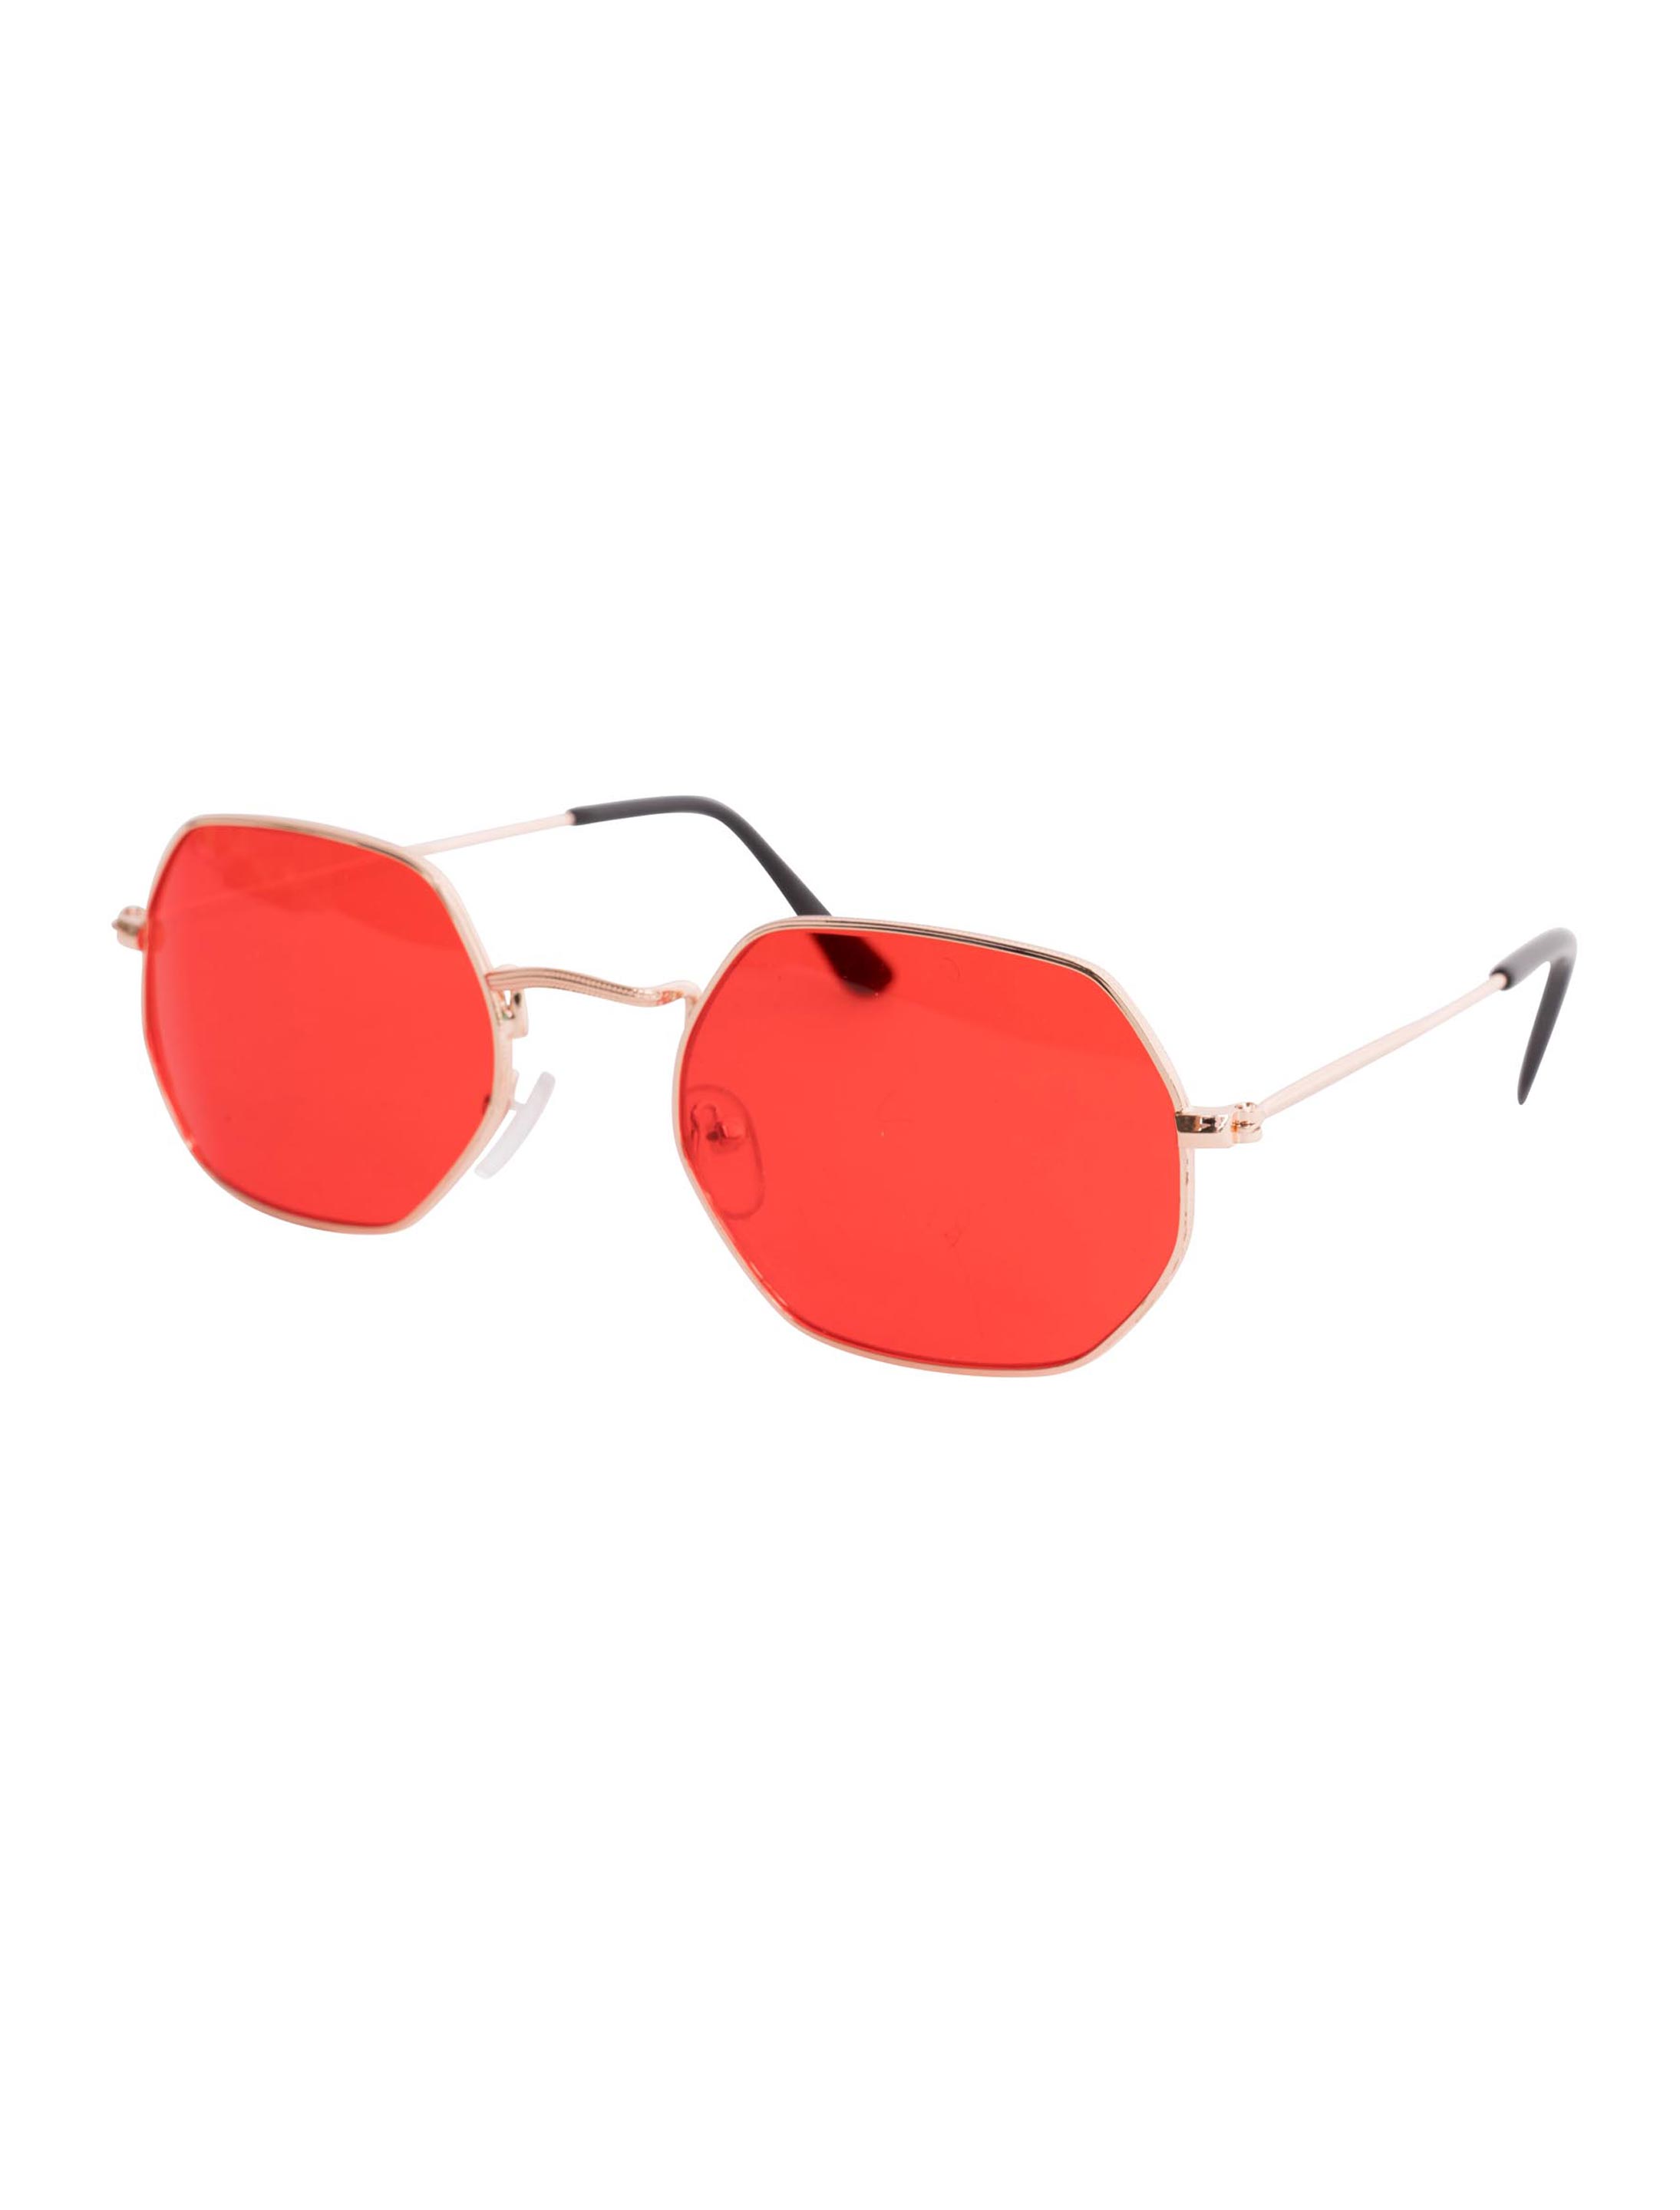 Brille Polygon rot